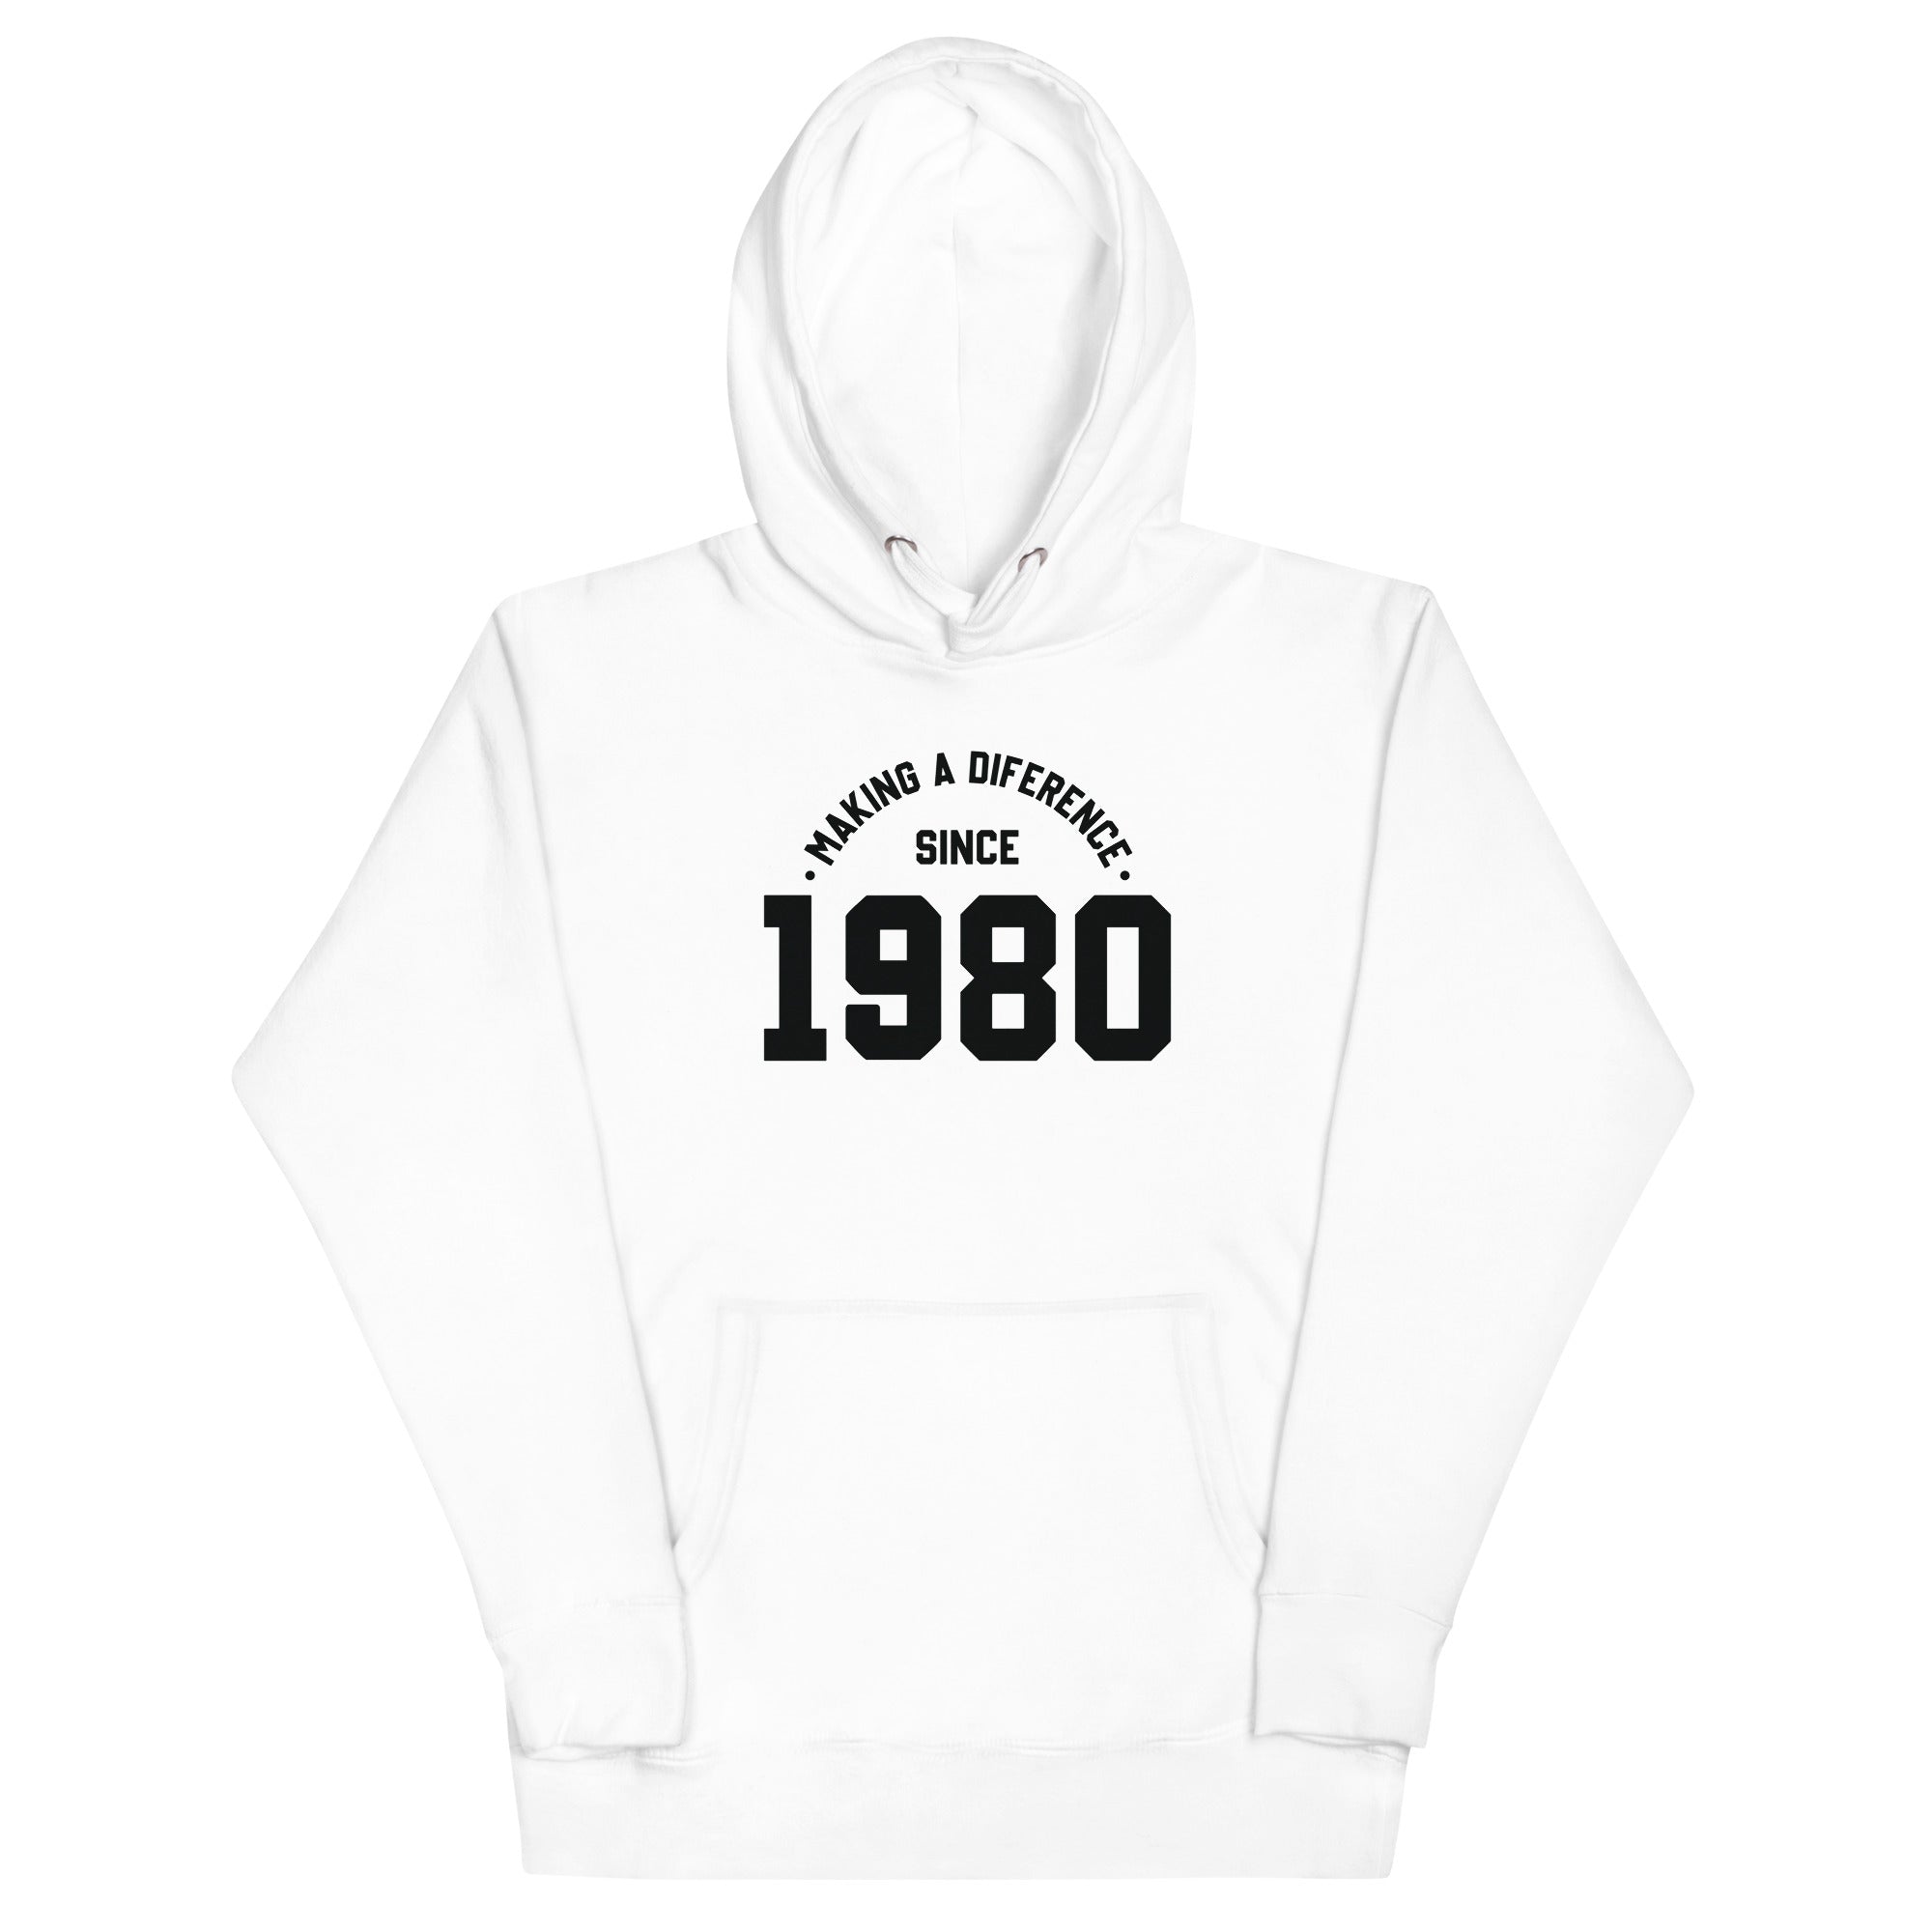 Unisex Hoodie | Making a diference since 1980